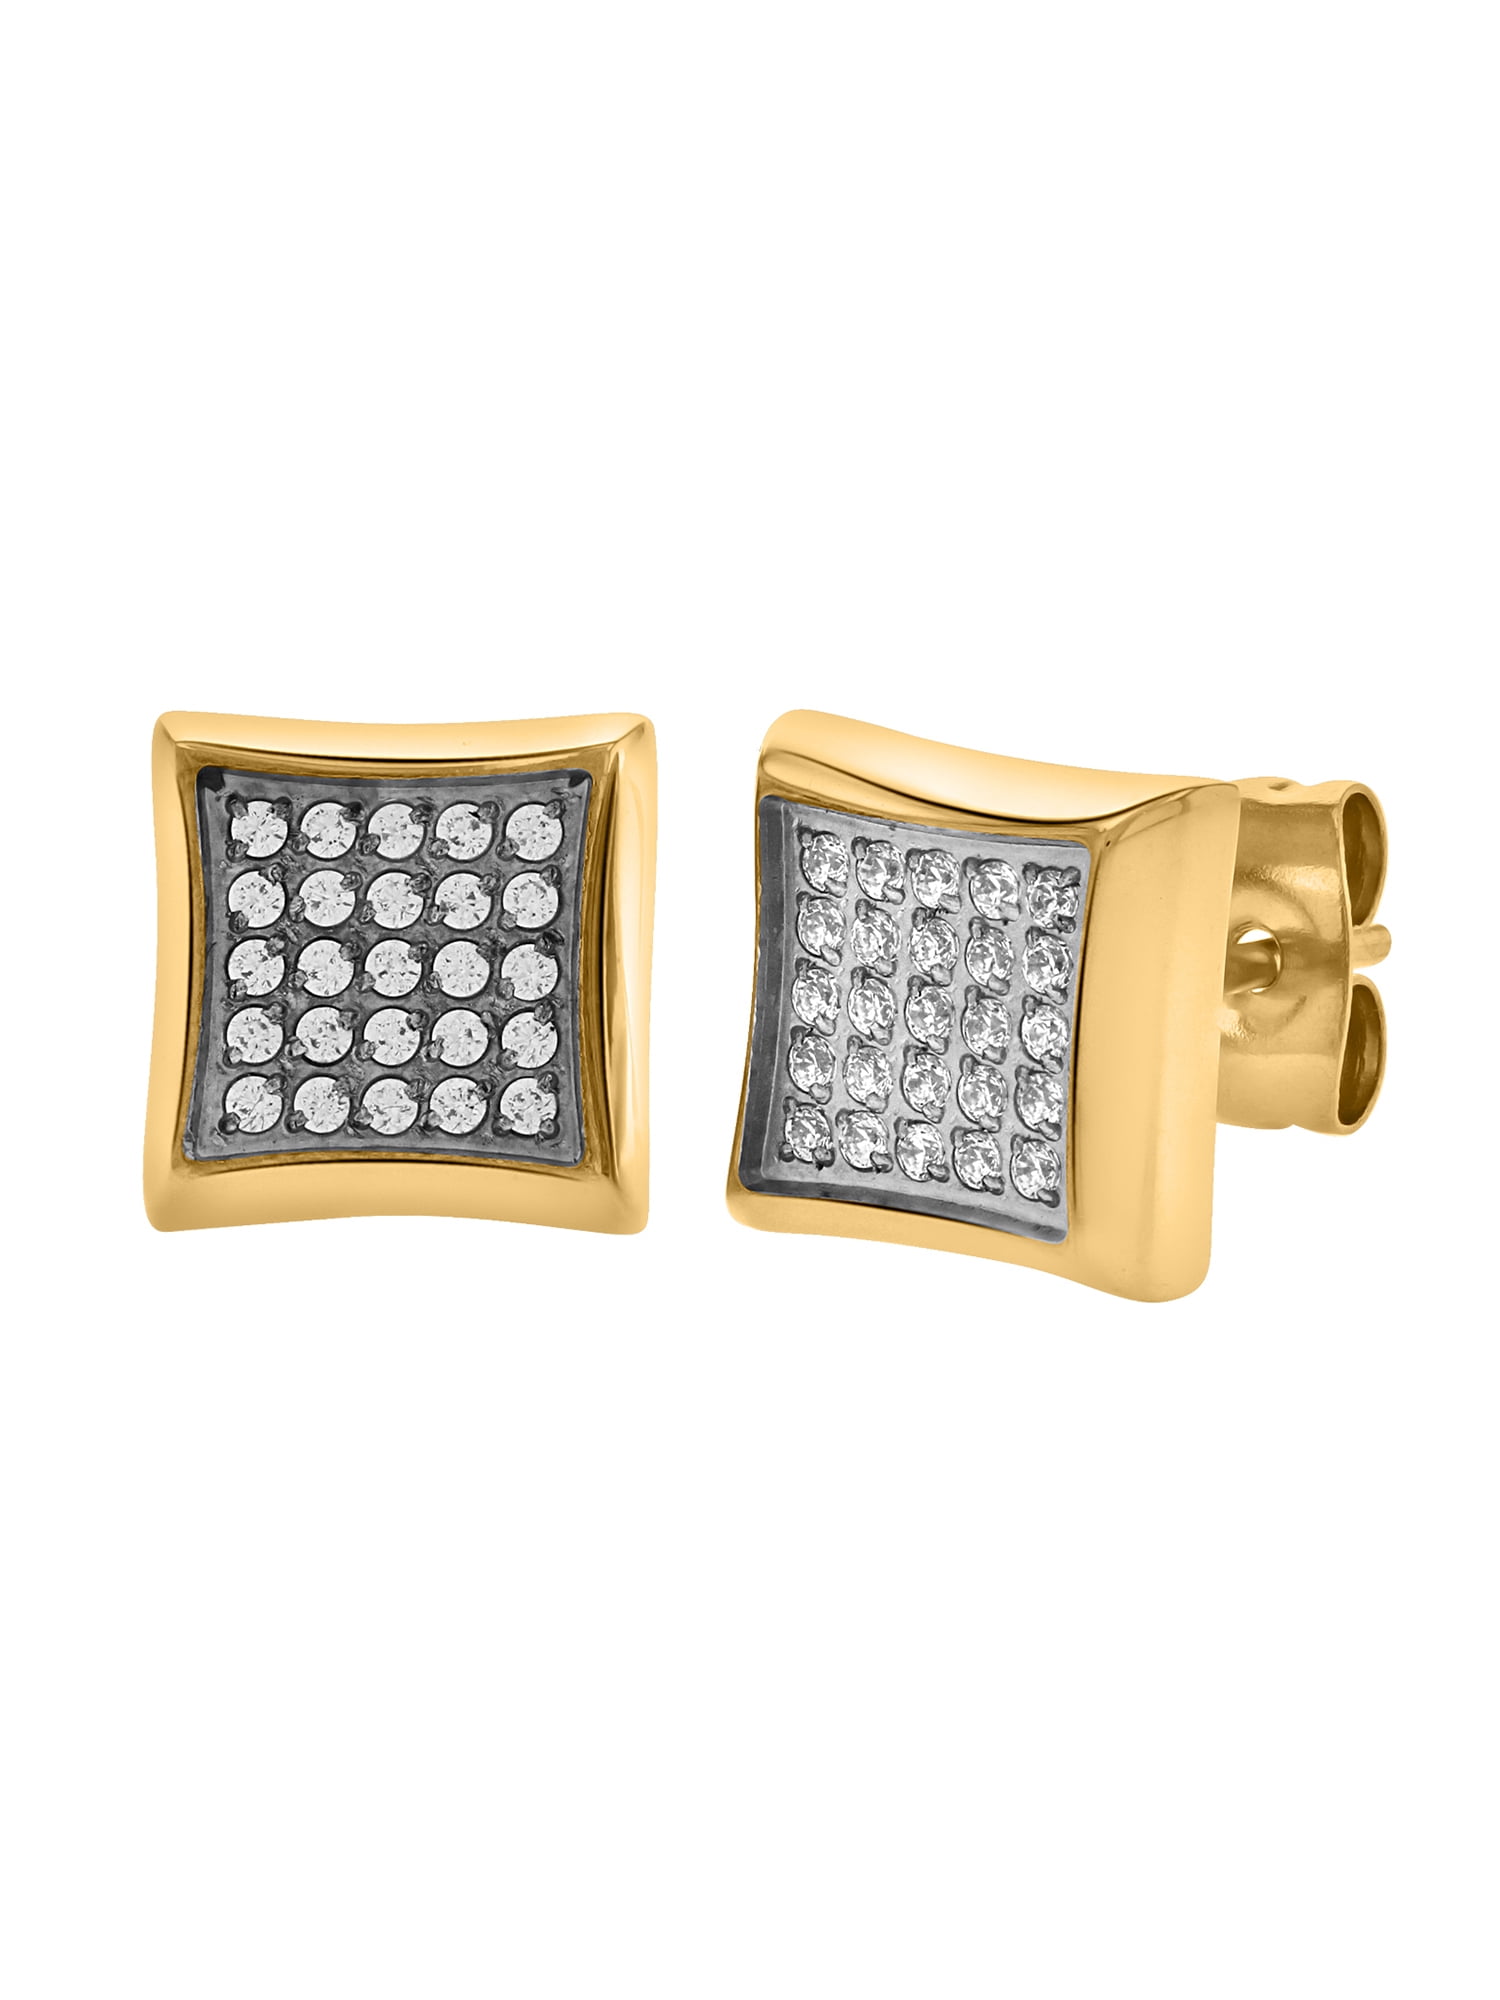 Men s Two Tone Yellow IP CZ Stainless Steel Stud Earrings 30c033f0 48b4 482b a042 80eedabd0d1c 1.2230e381315302d7e2923af888b33a8e